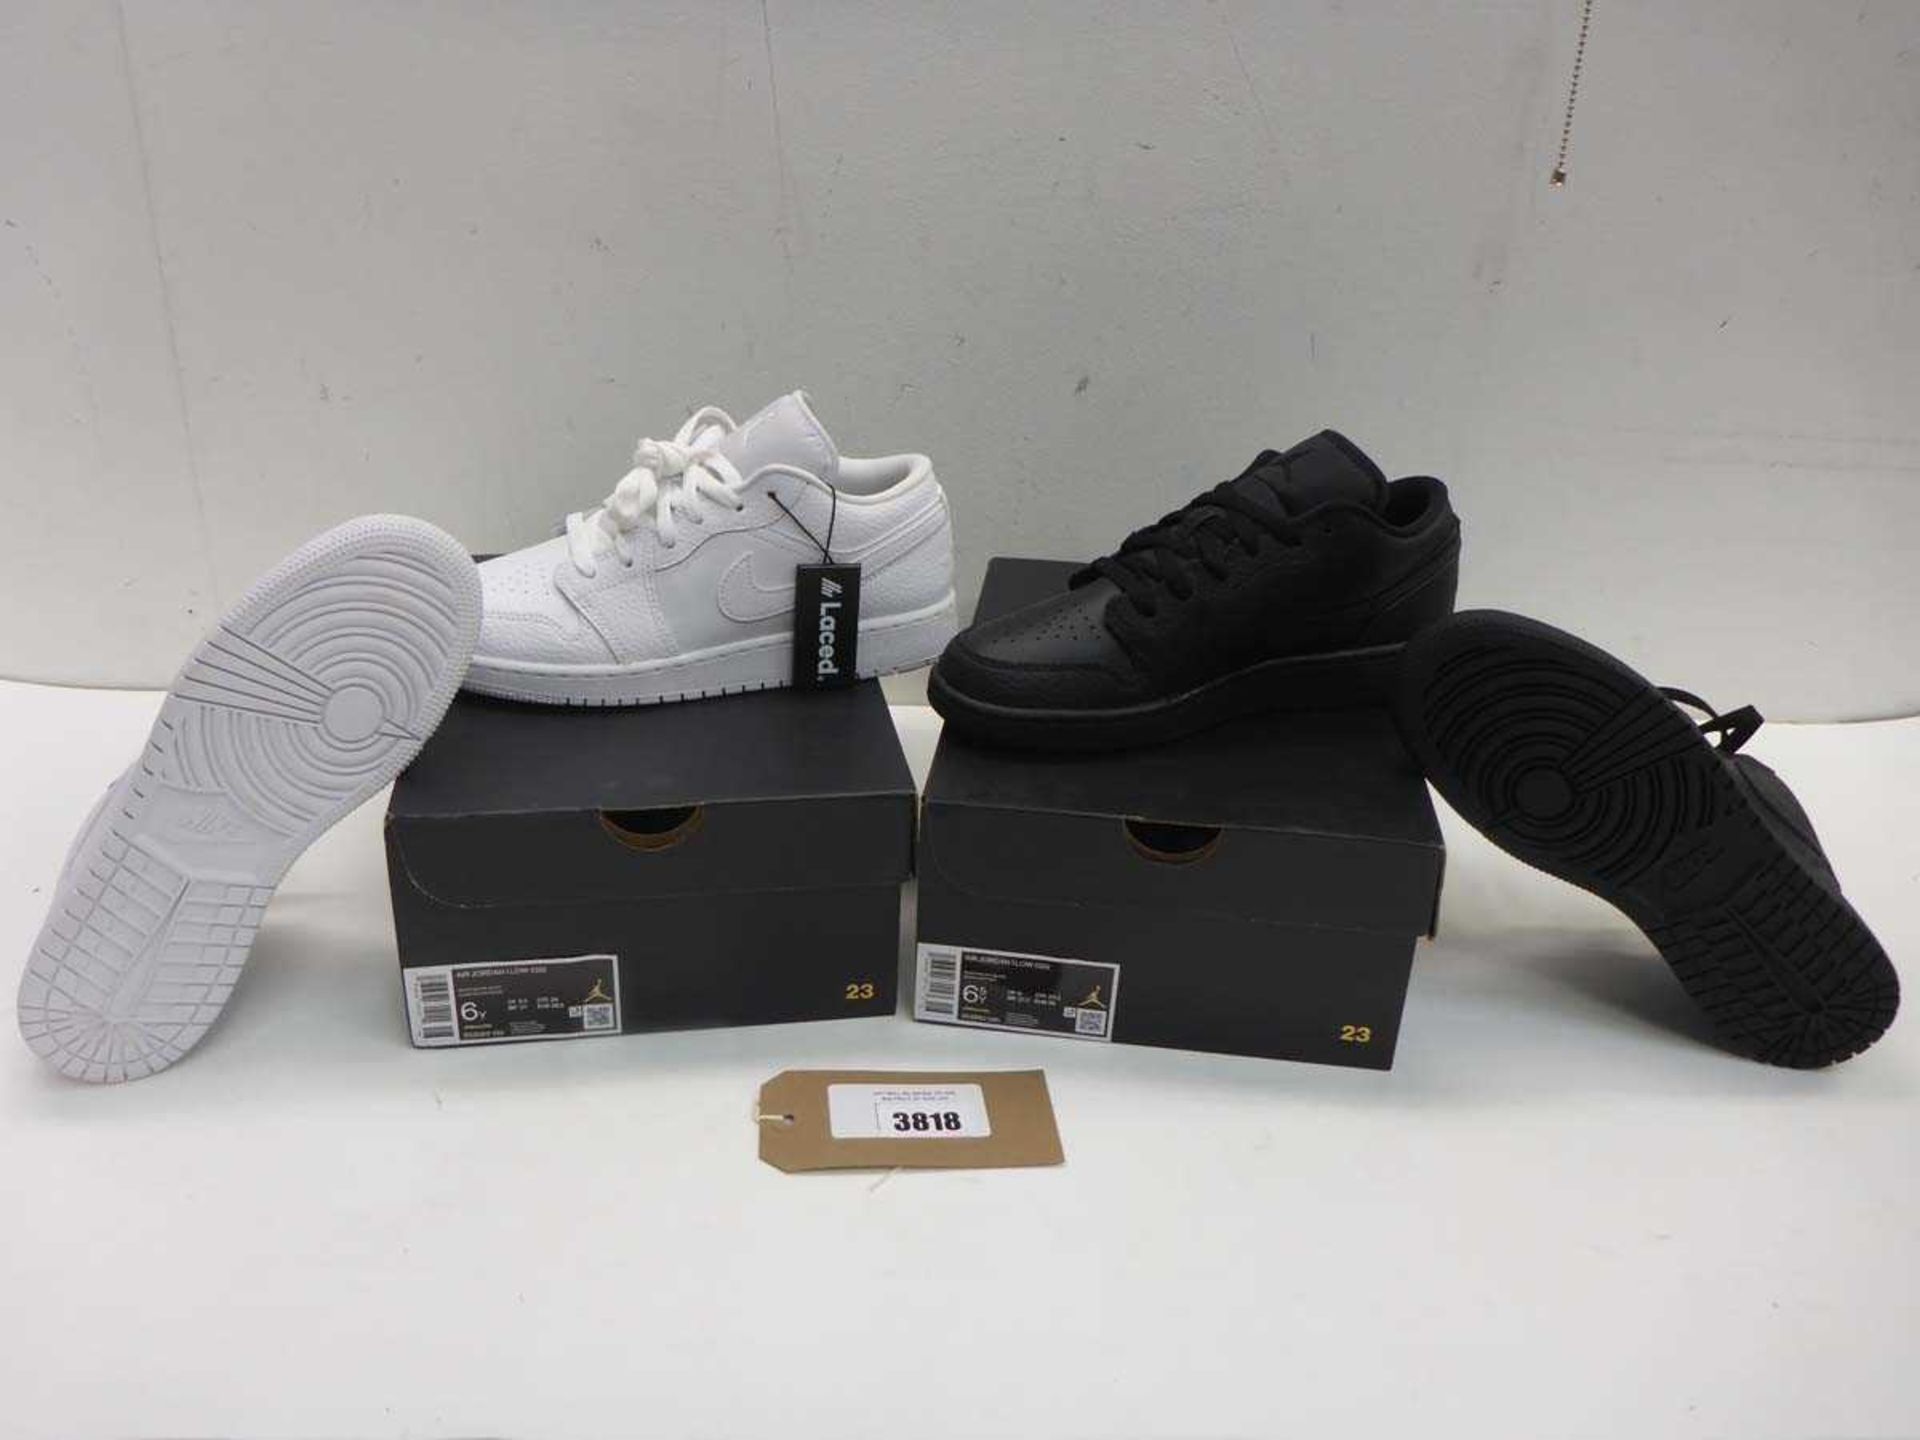 Air Jordan kids 1 Low (GS) black trainers Size 6 and Air Jordan kids 1 Low (GS) white trainers